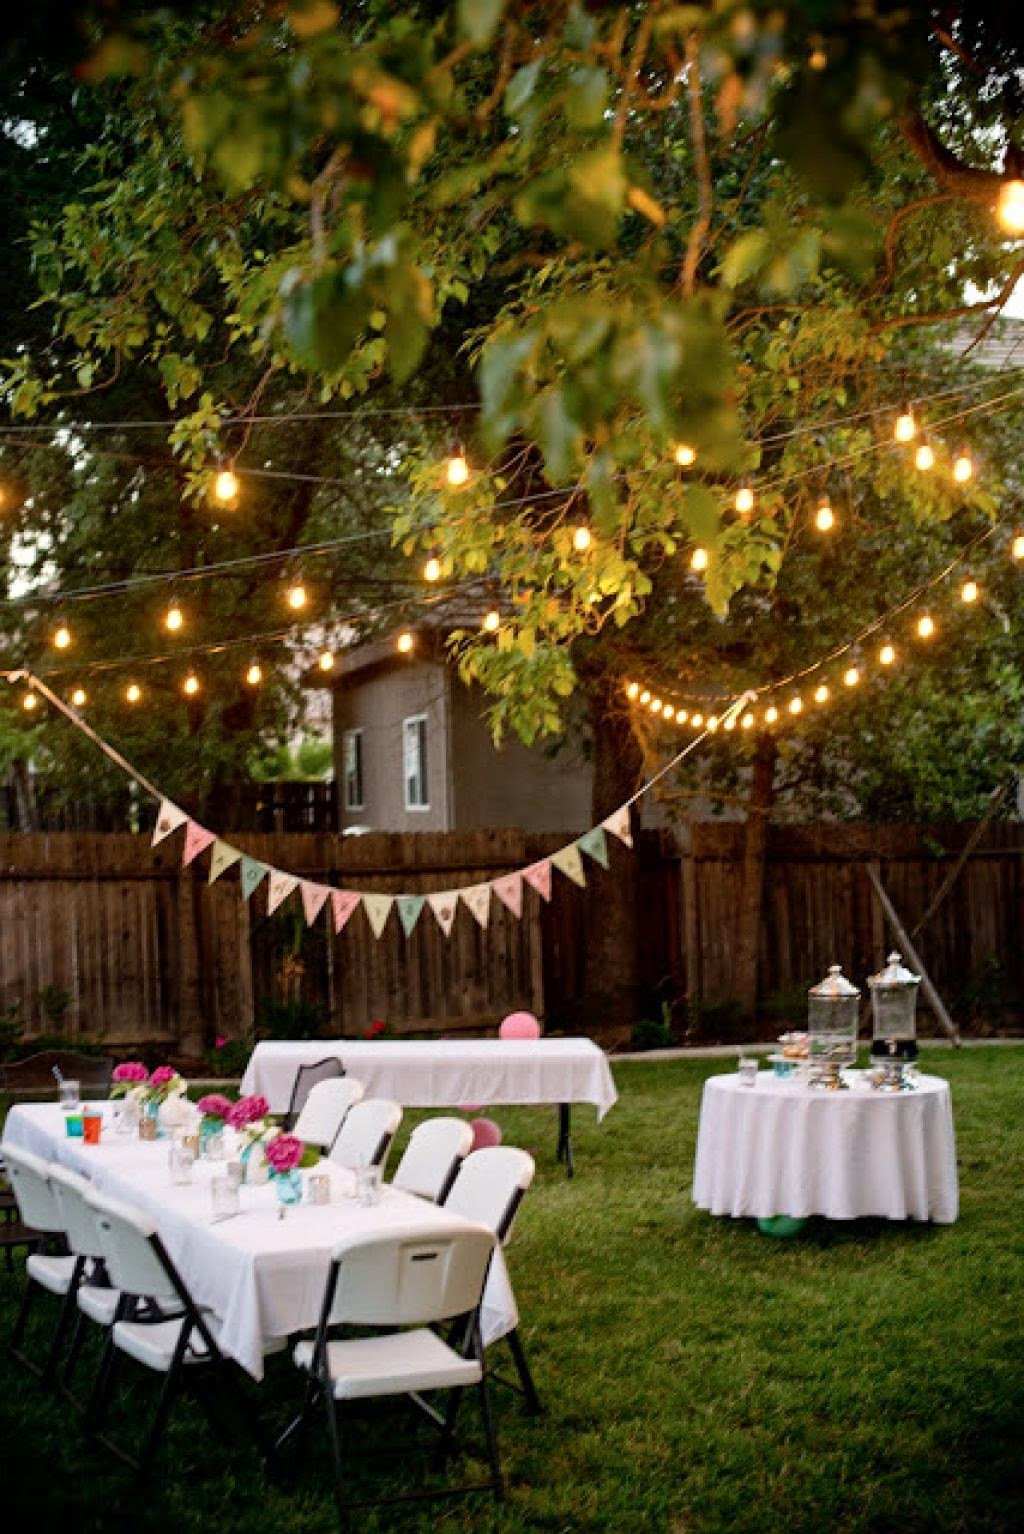 Backyard Dinner Party Ideas
 Enjoy a year end party in the backyard